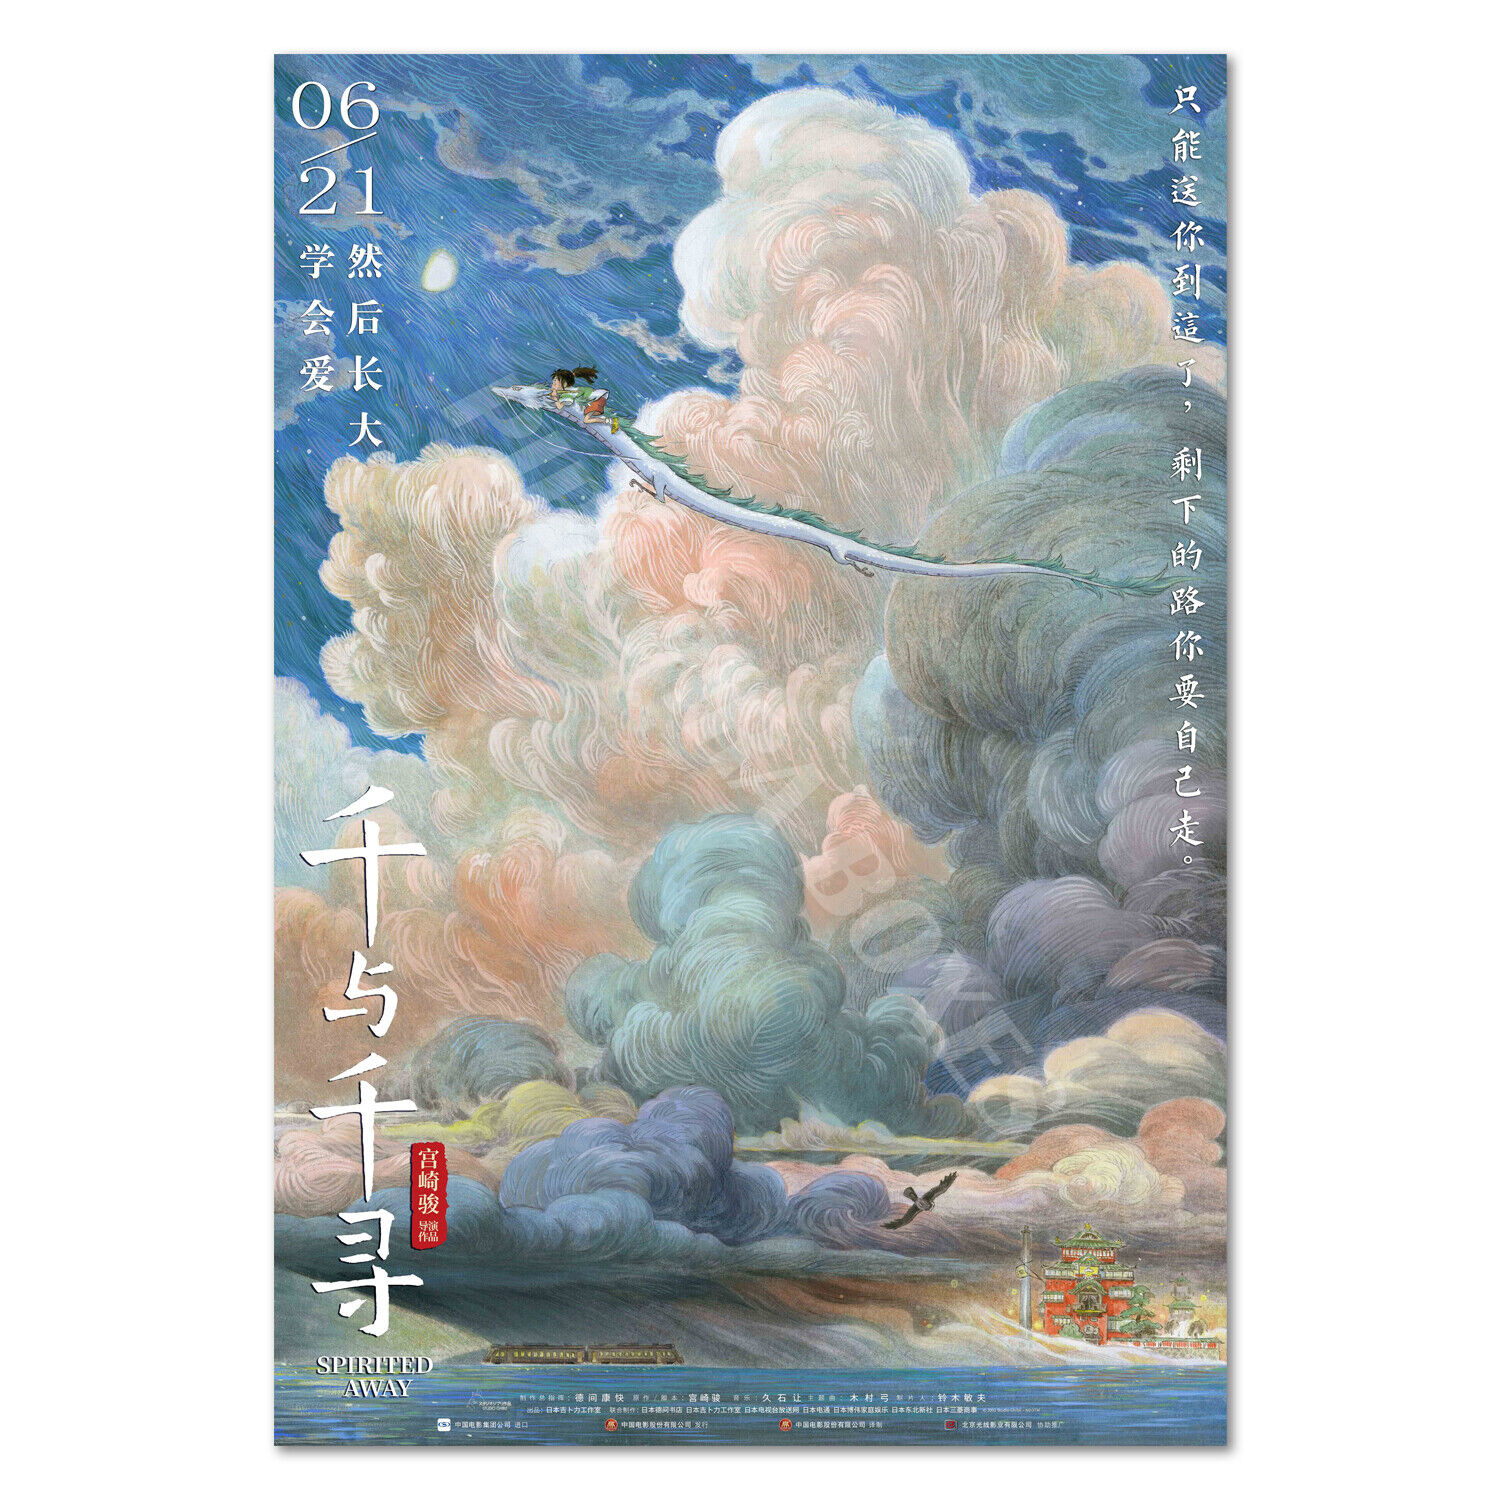 Spirited Away Poster - Chinese Promotion Art - High Quality Prints